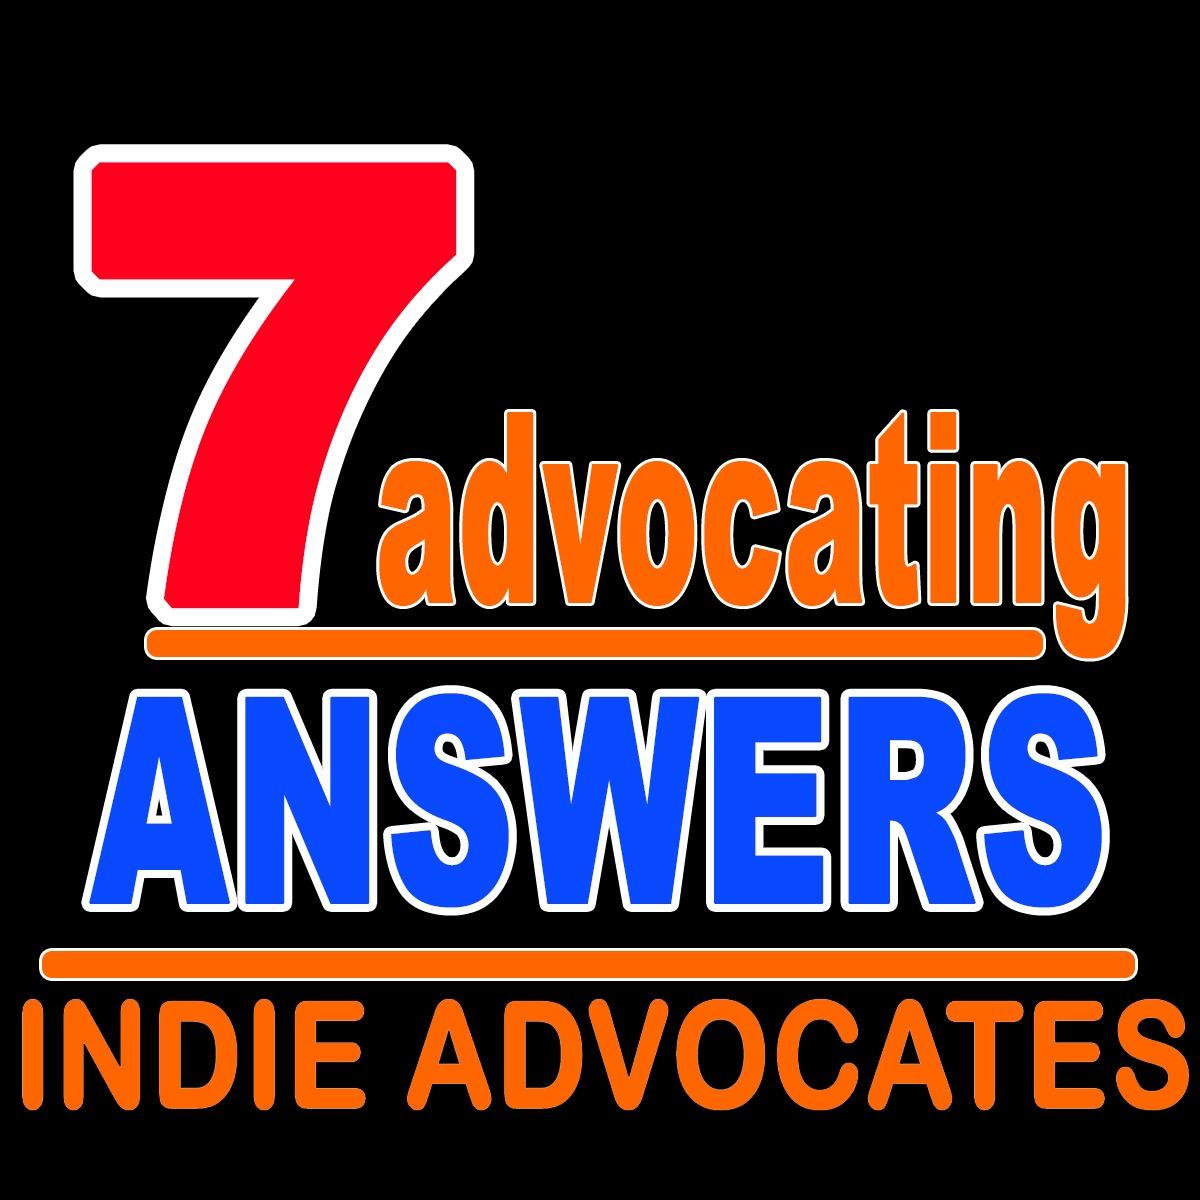 7  Questions and to Create 7 Advocating Answers